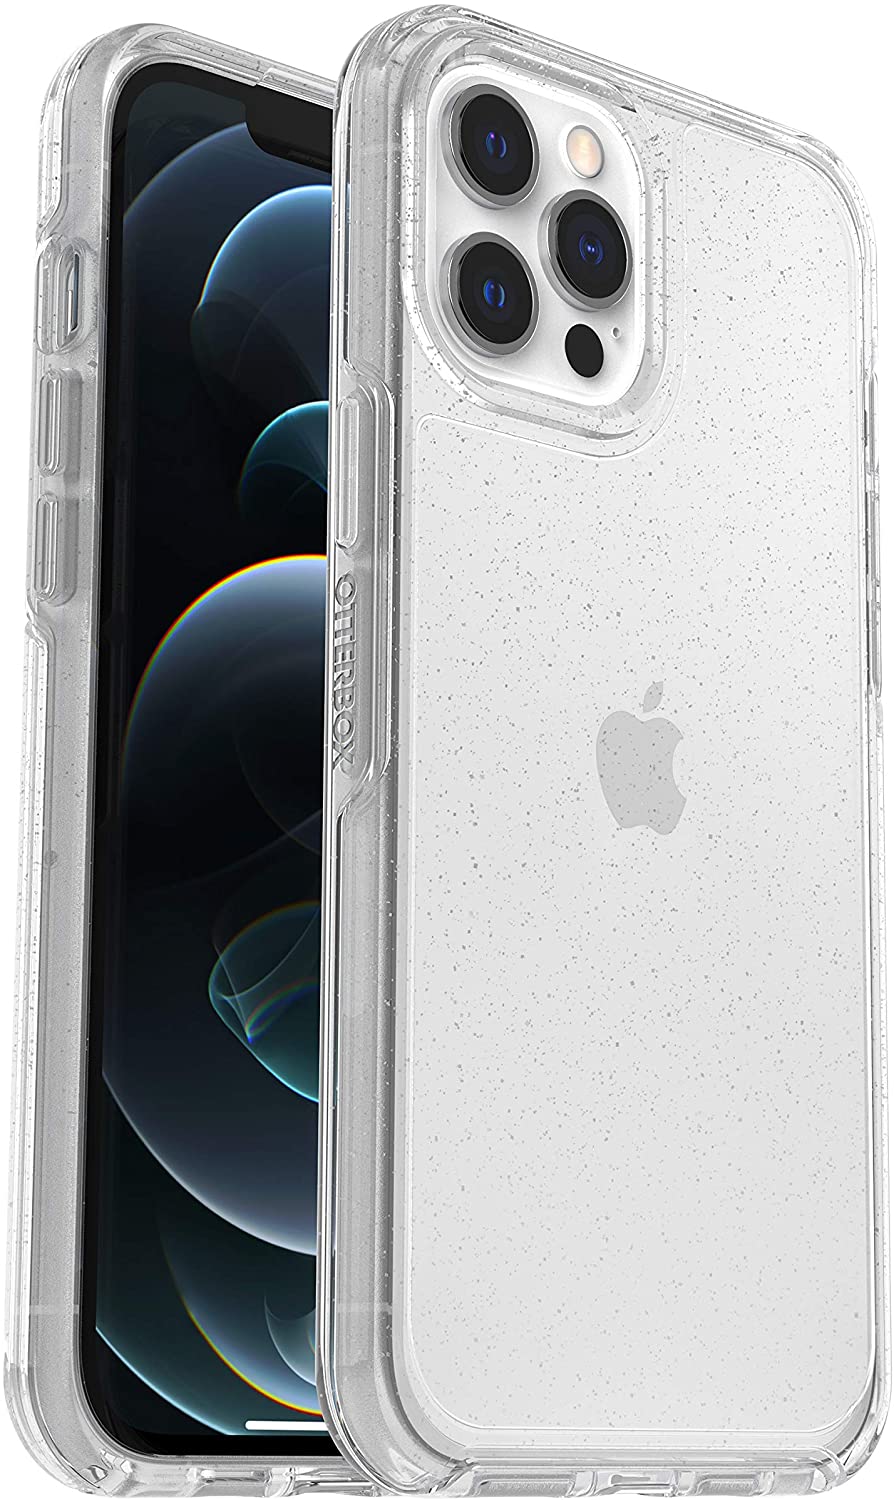 OtterBox SYMMETRY SERIES Case for Apple iPhone 12 Pro Max - Stardust (Certified Refurbished)